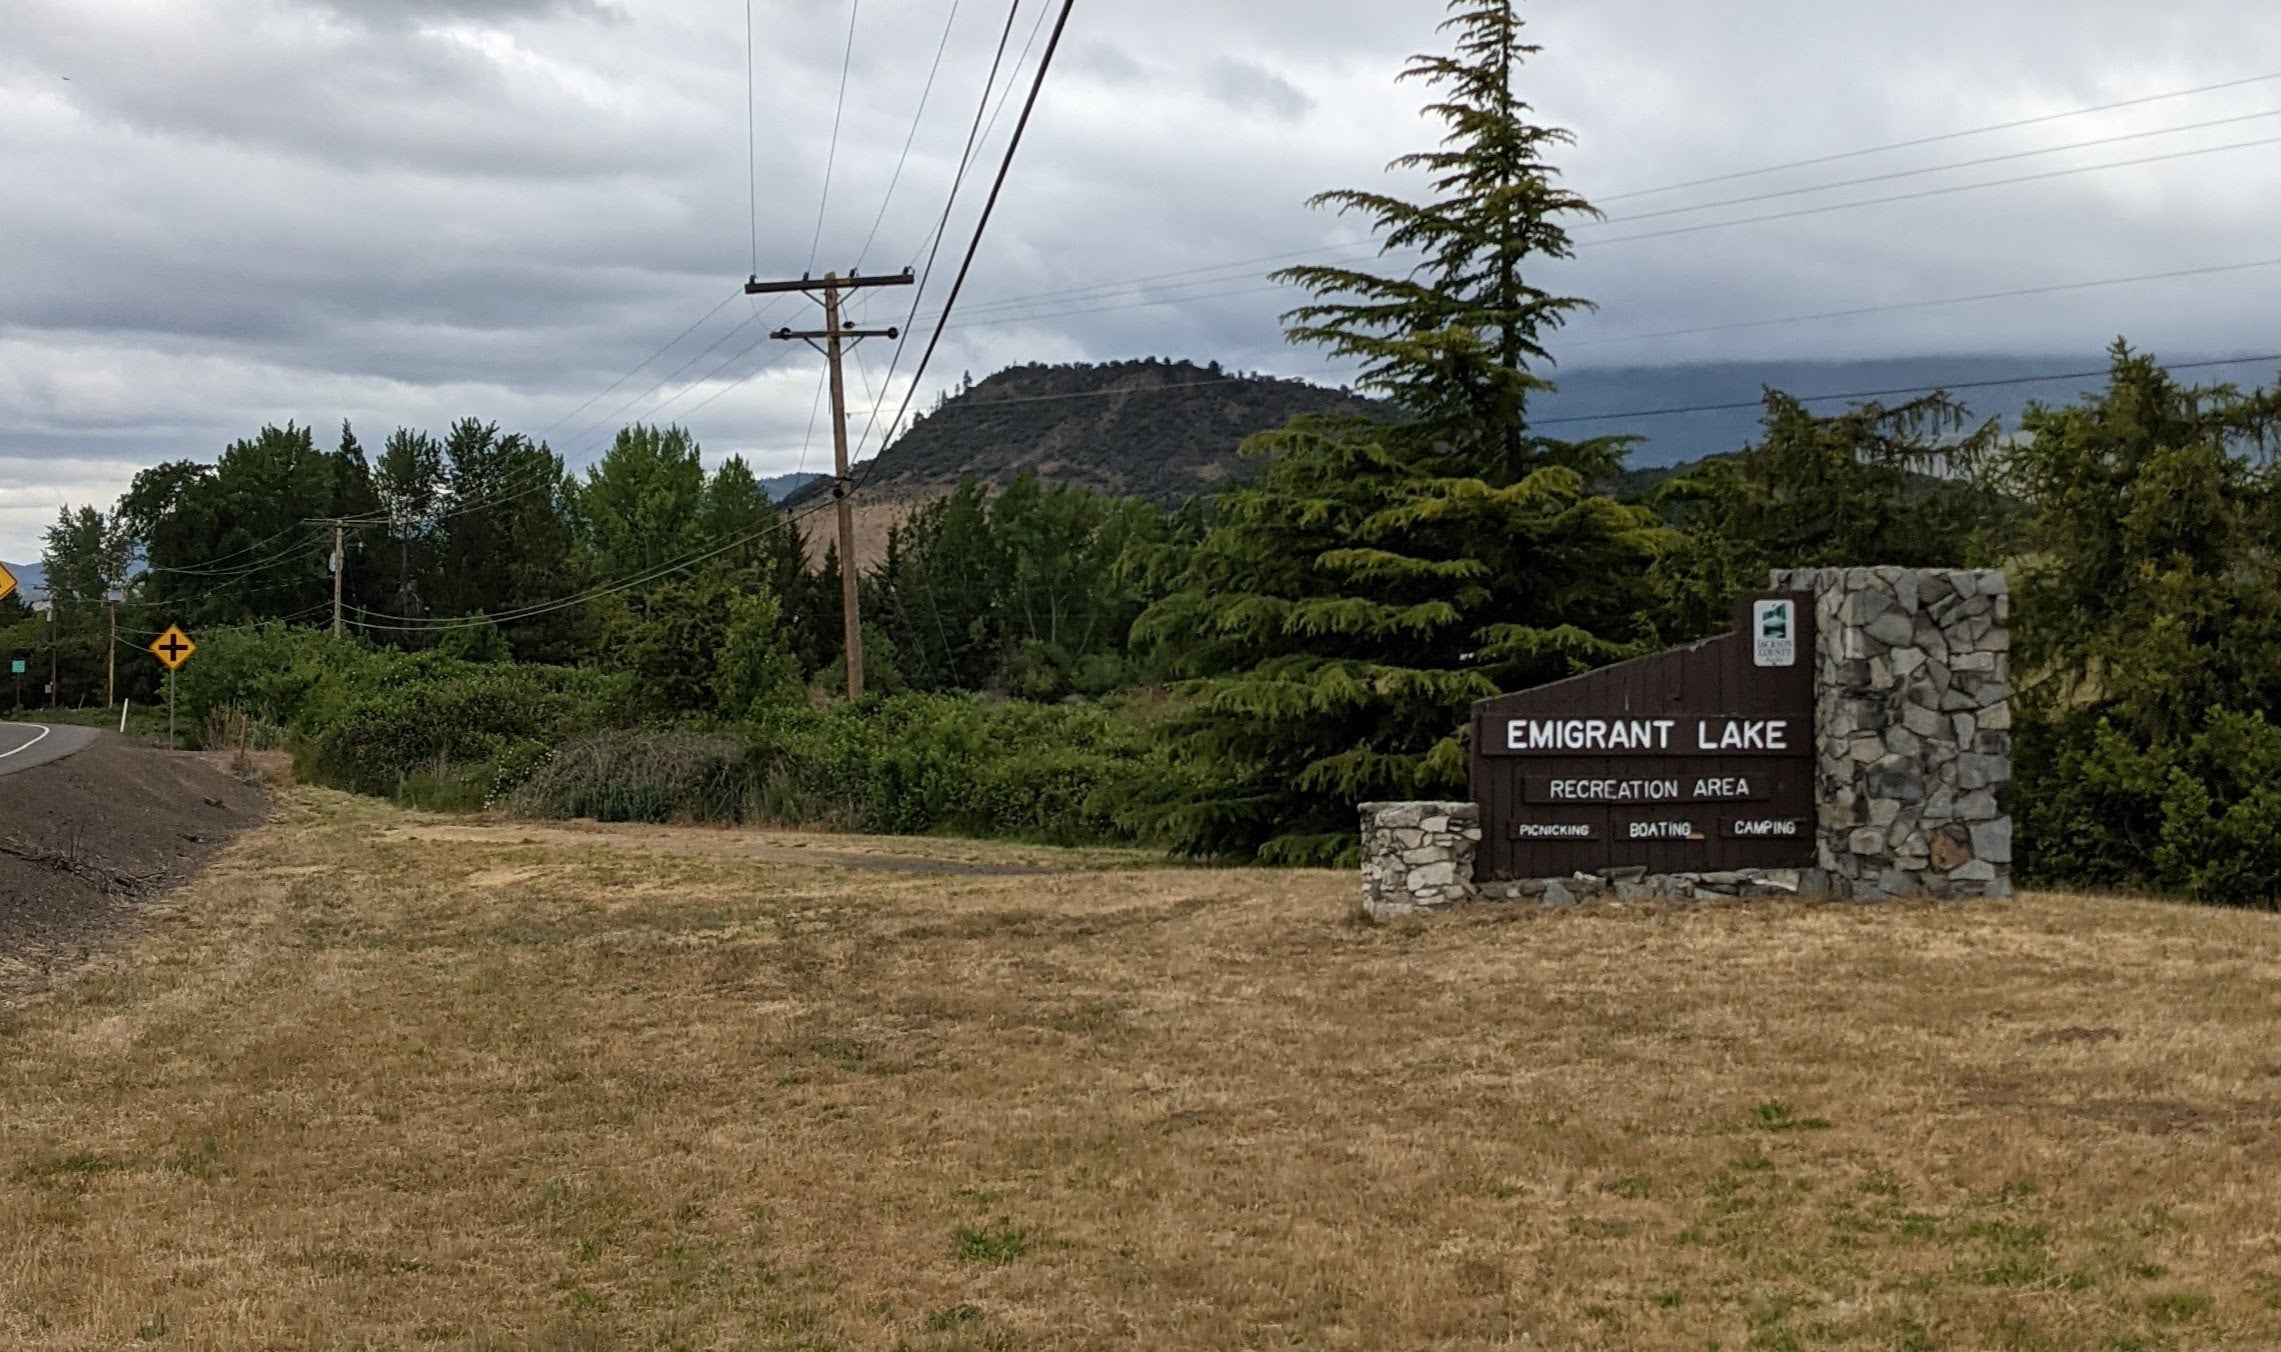 Camper submitted image from Emigrant Lake Recreation Area - Oak Slope Campground - 1